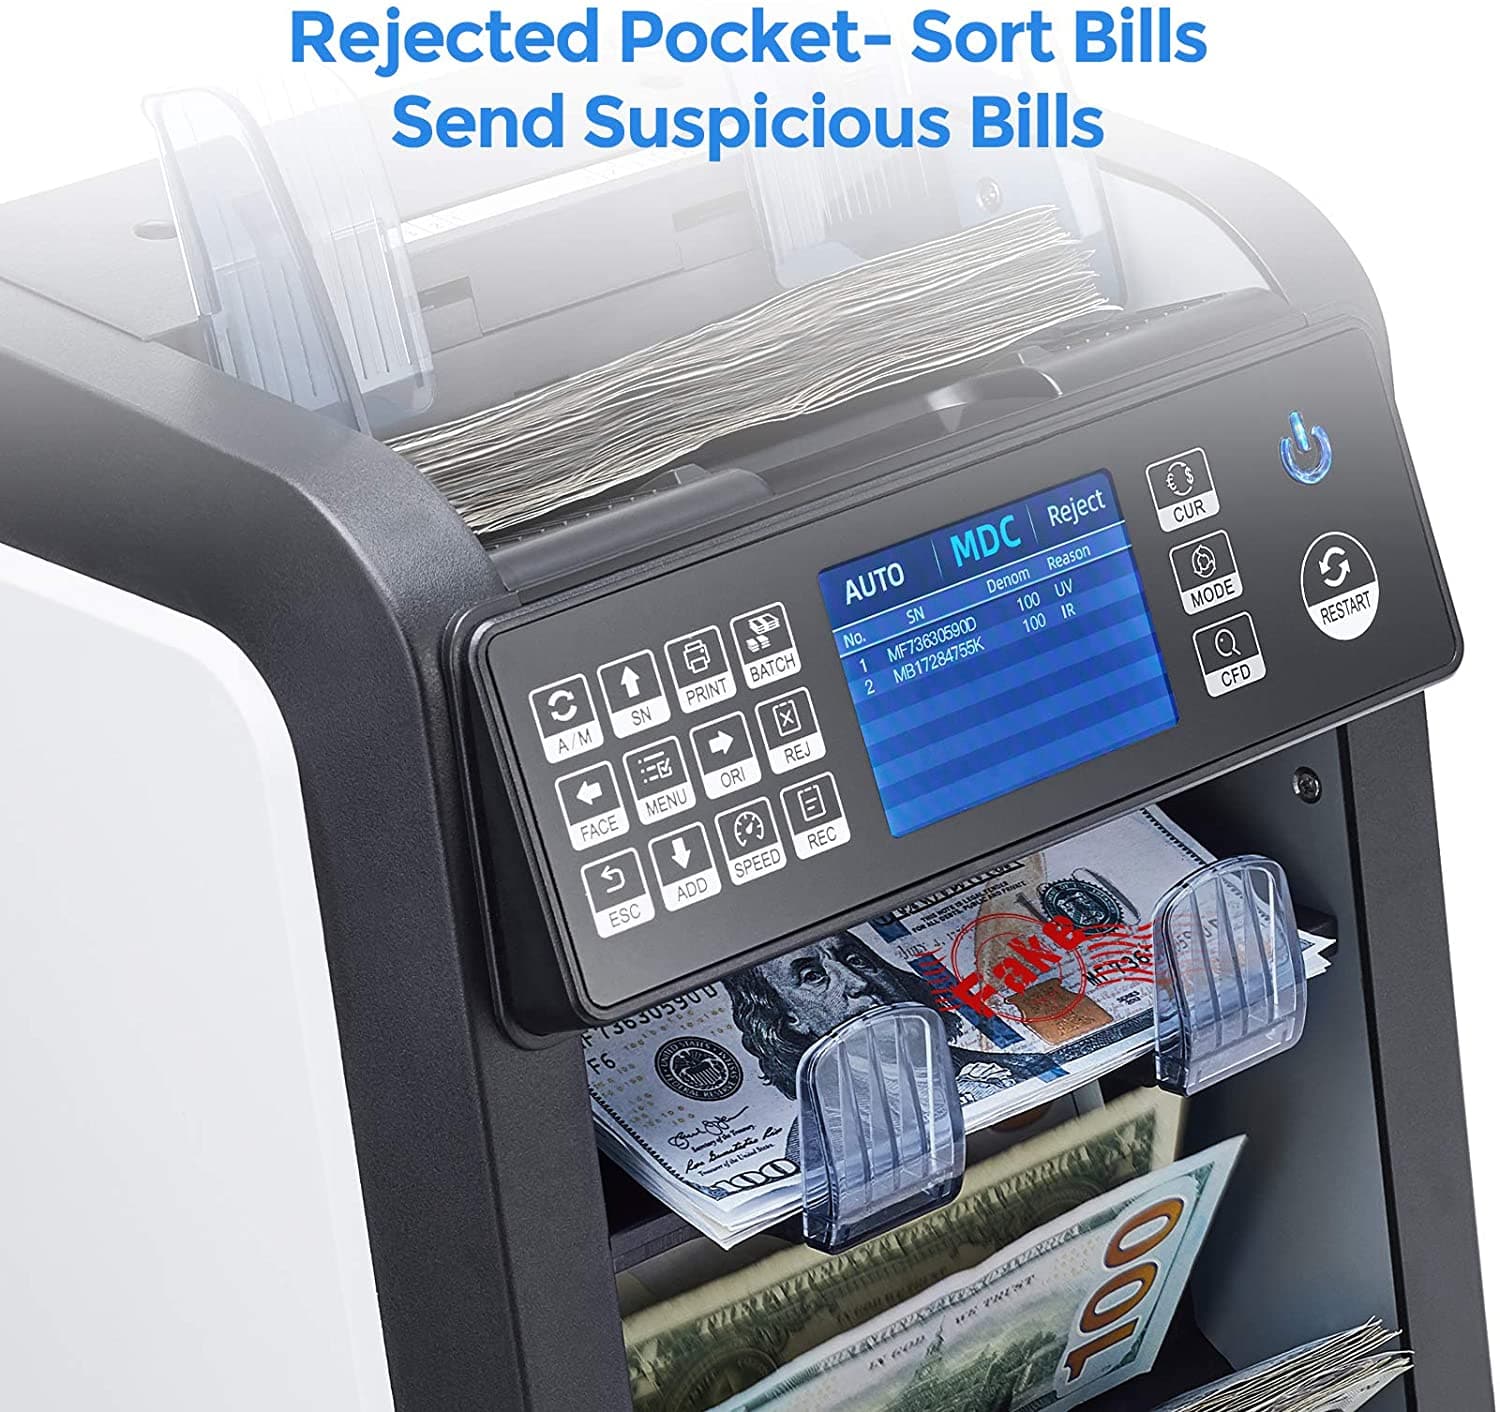  Swedza Cash Counting Machine with Denomination | Cassida 6600 Money Counter.MUNBYN Mixed Denomination Bill Counter Sorter with Value Counting, 2 Pocket for Sorting, IMC08. Rejected prcket-sort bills. Send suspicious bills.